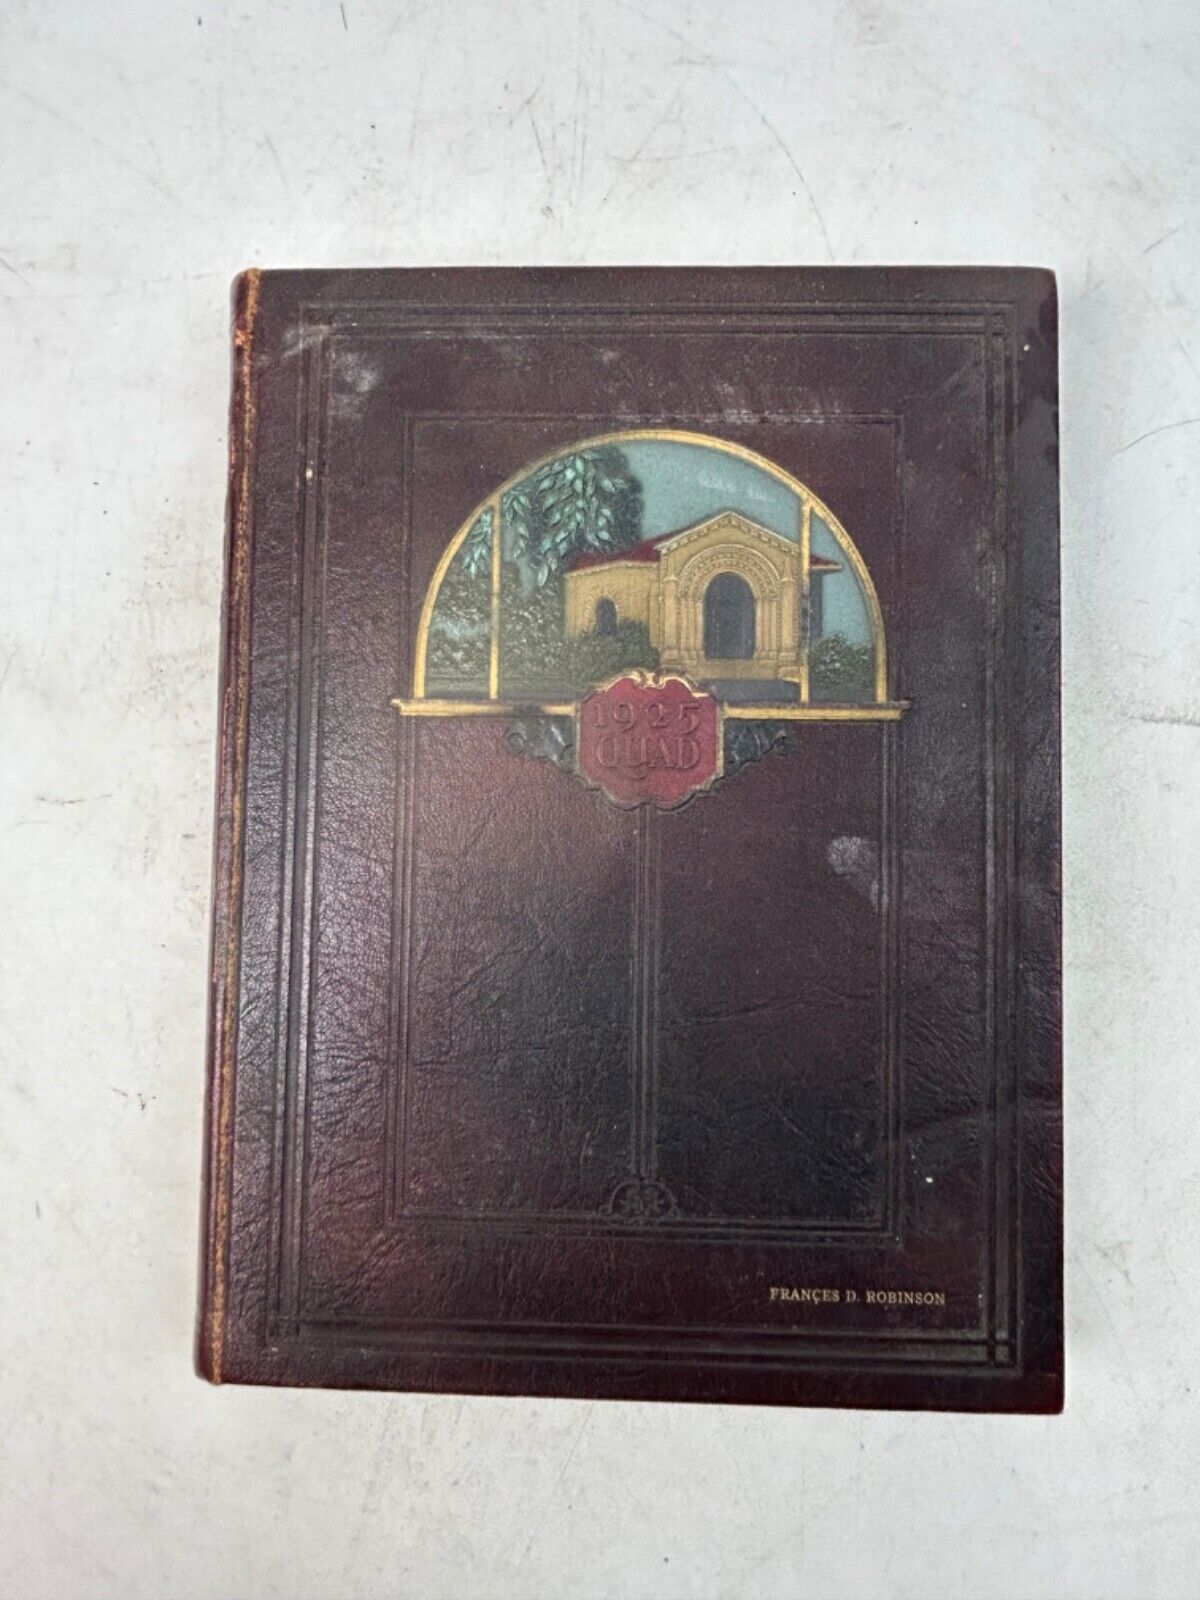 Vintage 1925 The Stanford Quad Yearbook